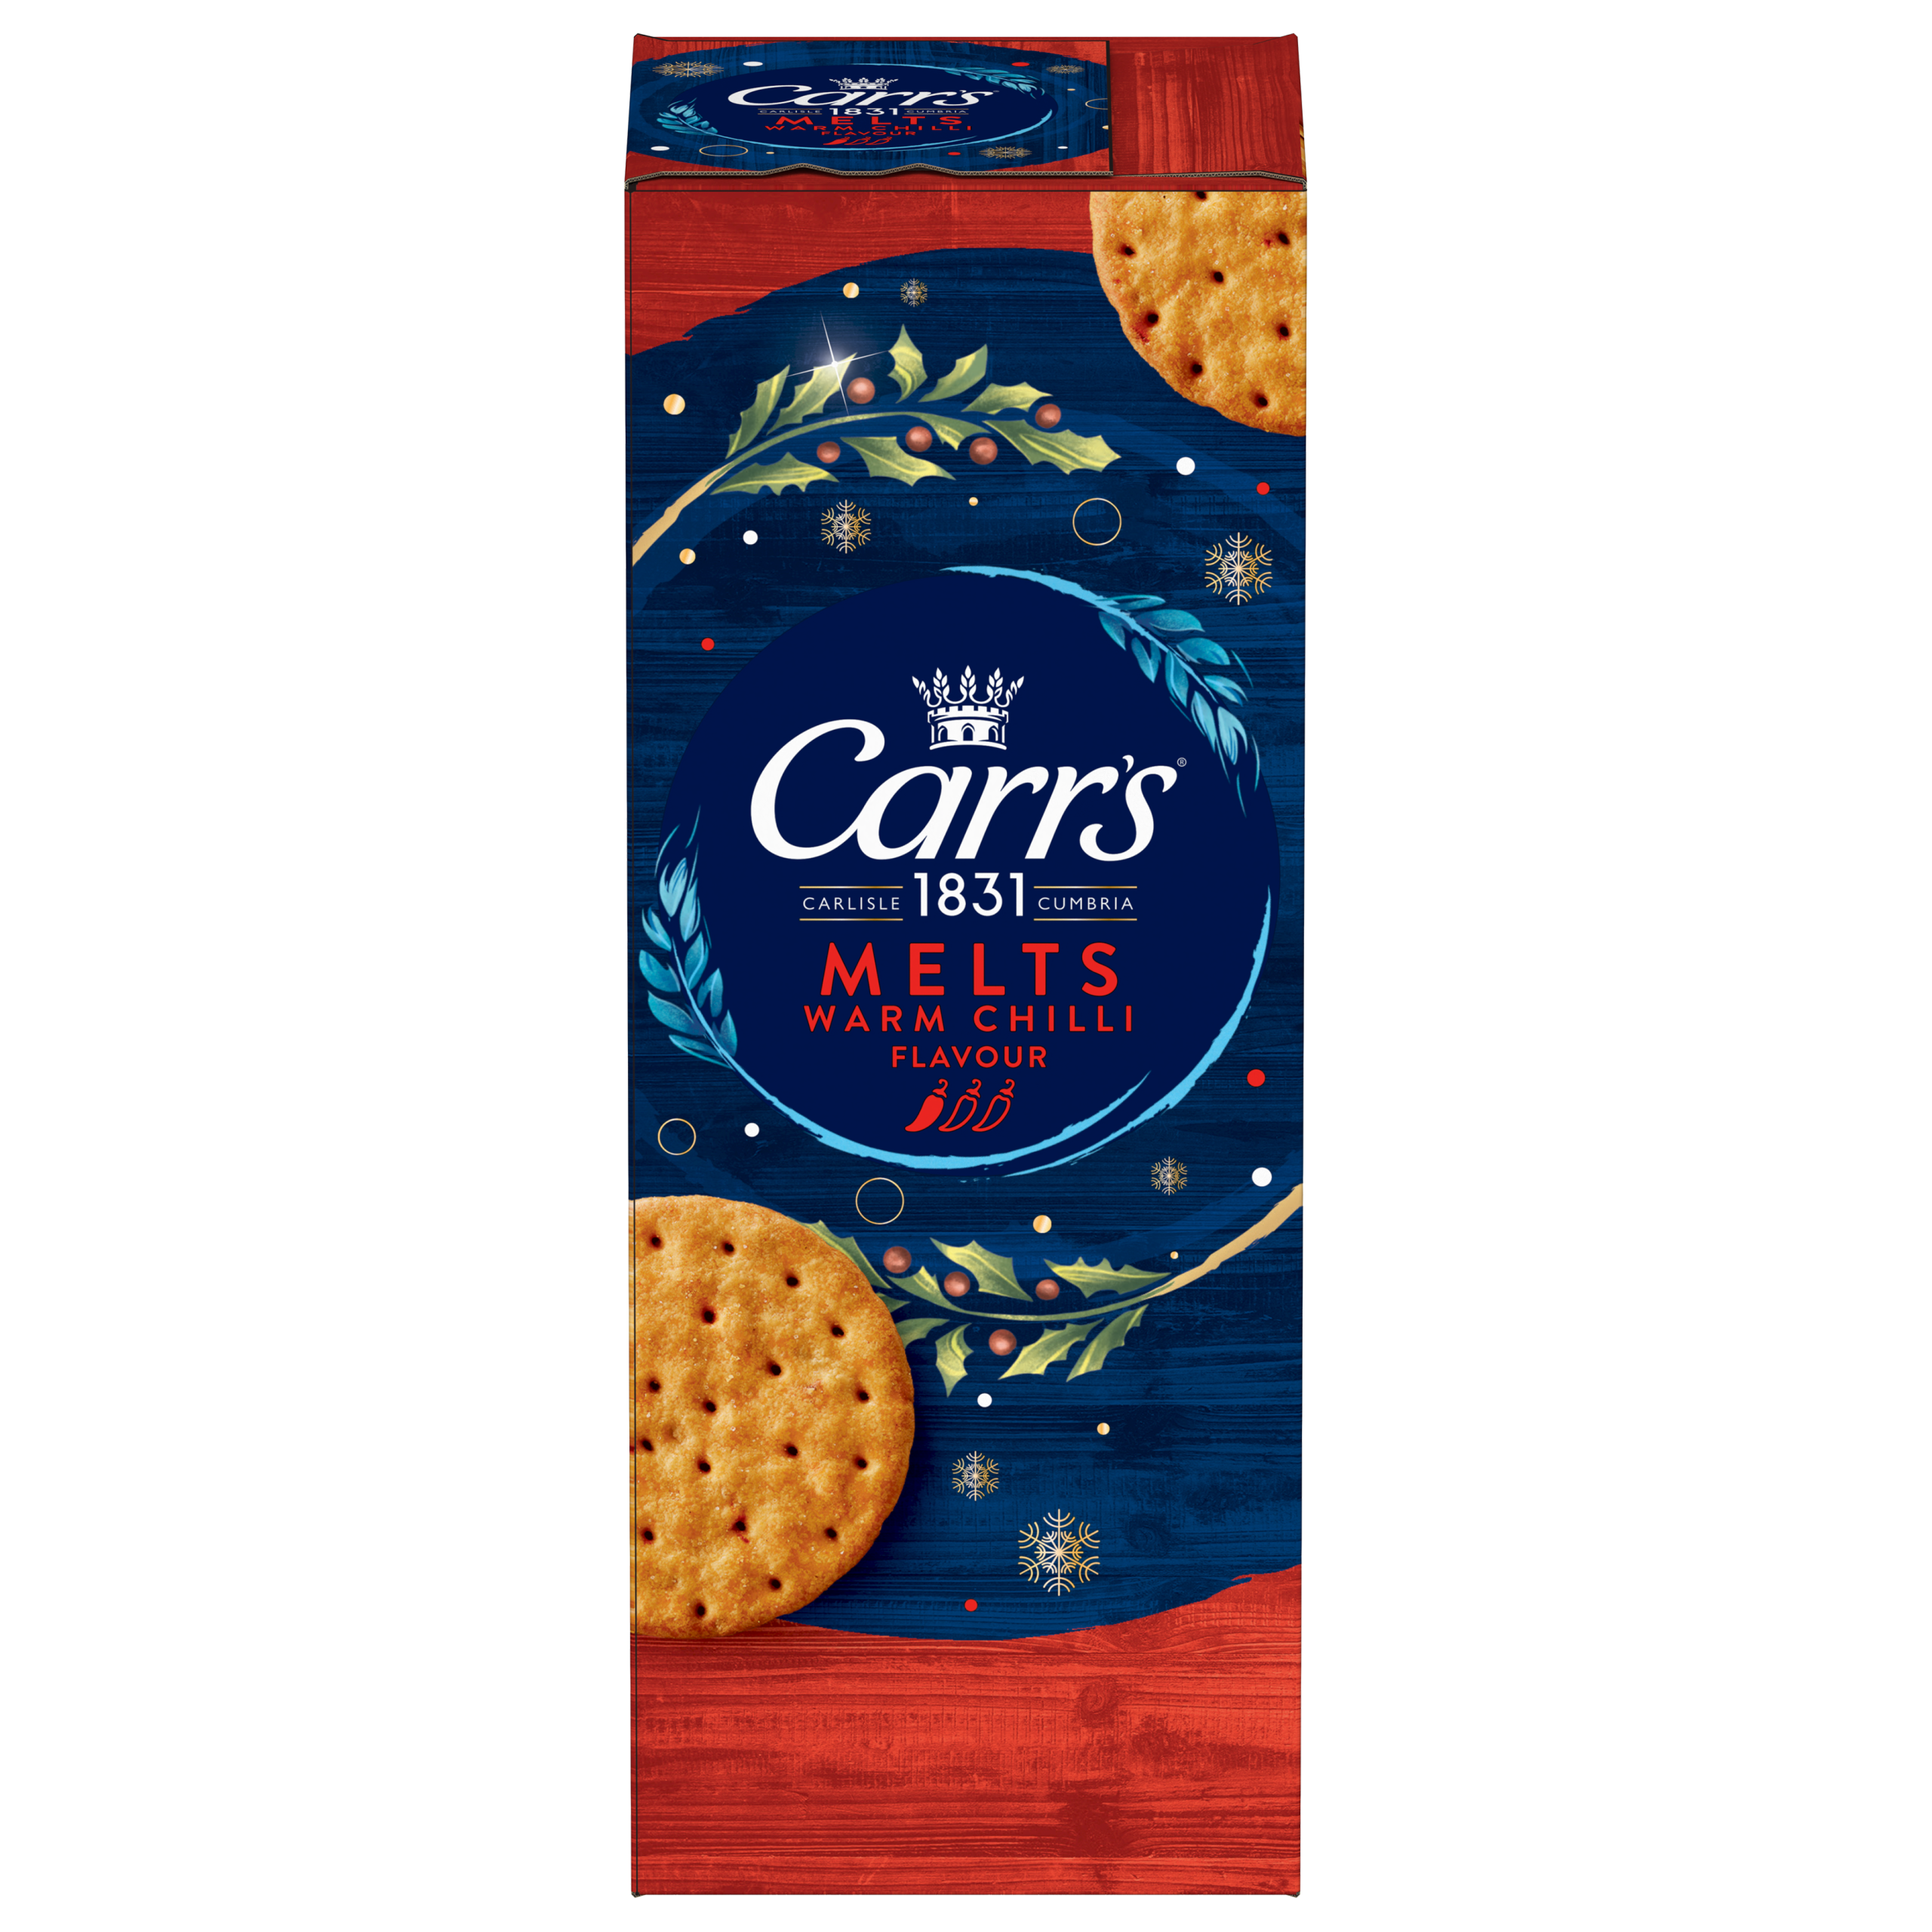 Savour seasonal snacking sales with Jacob’s and Carr’s